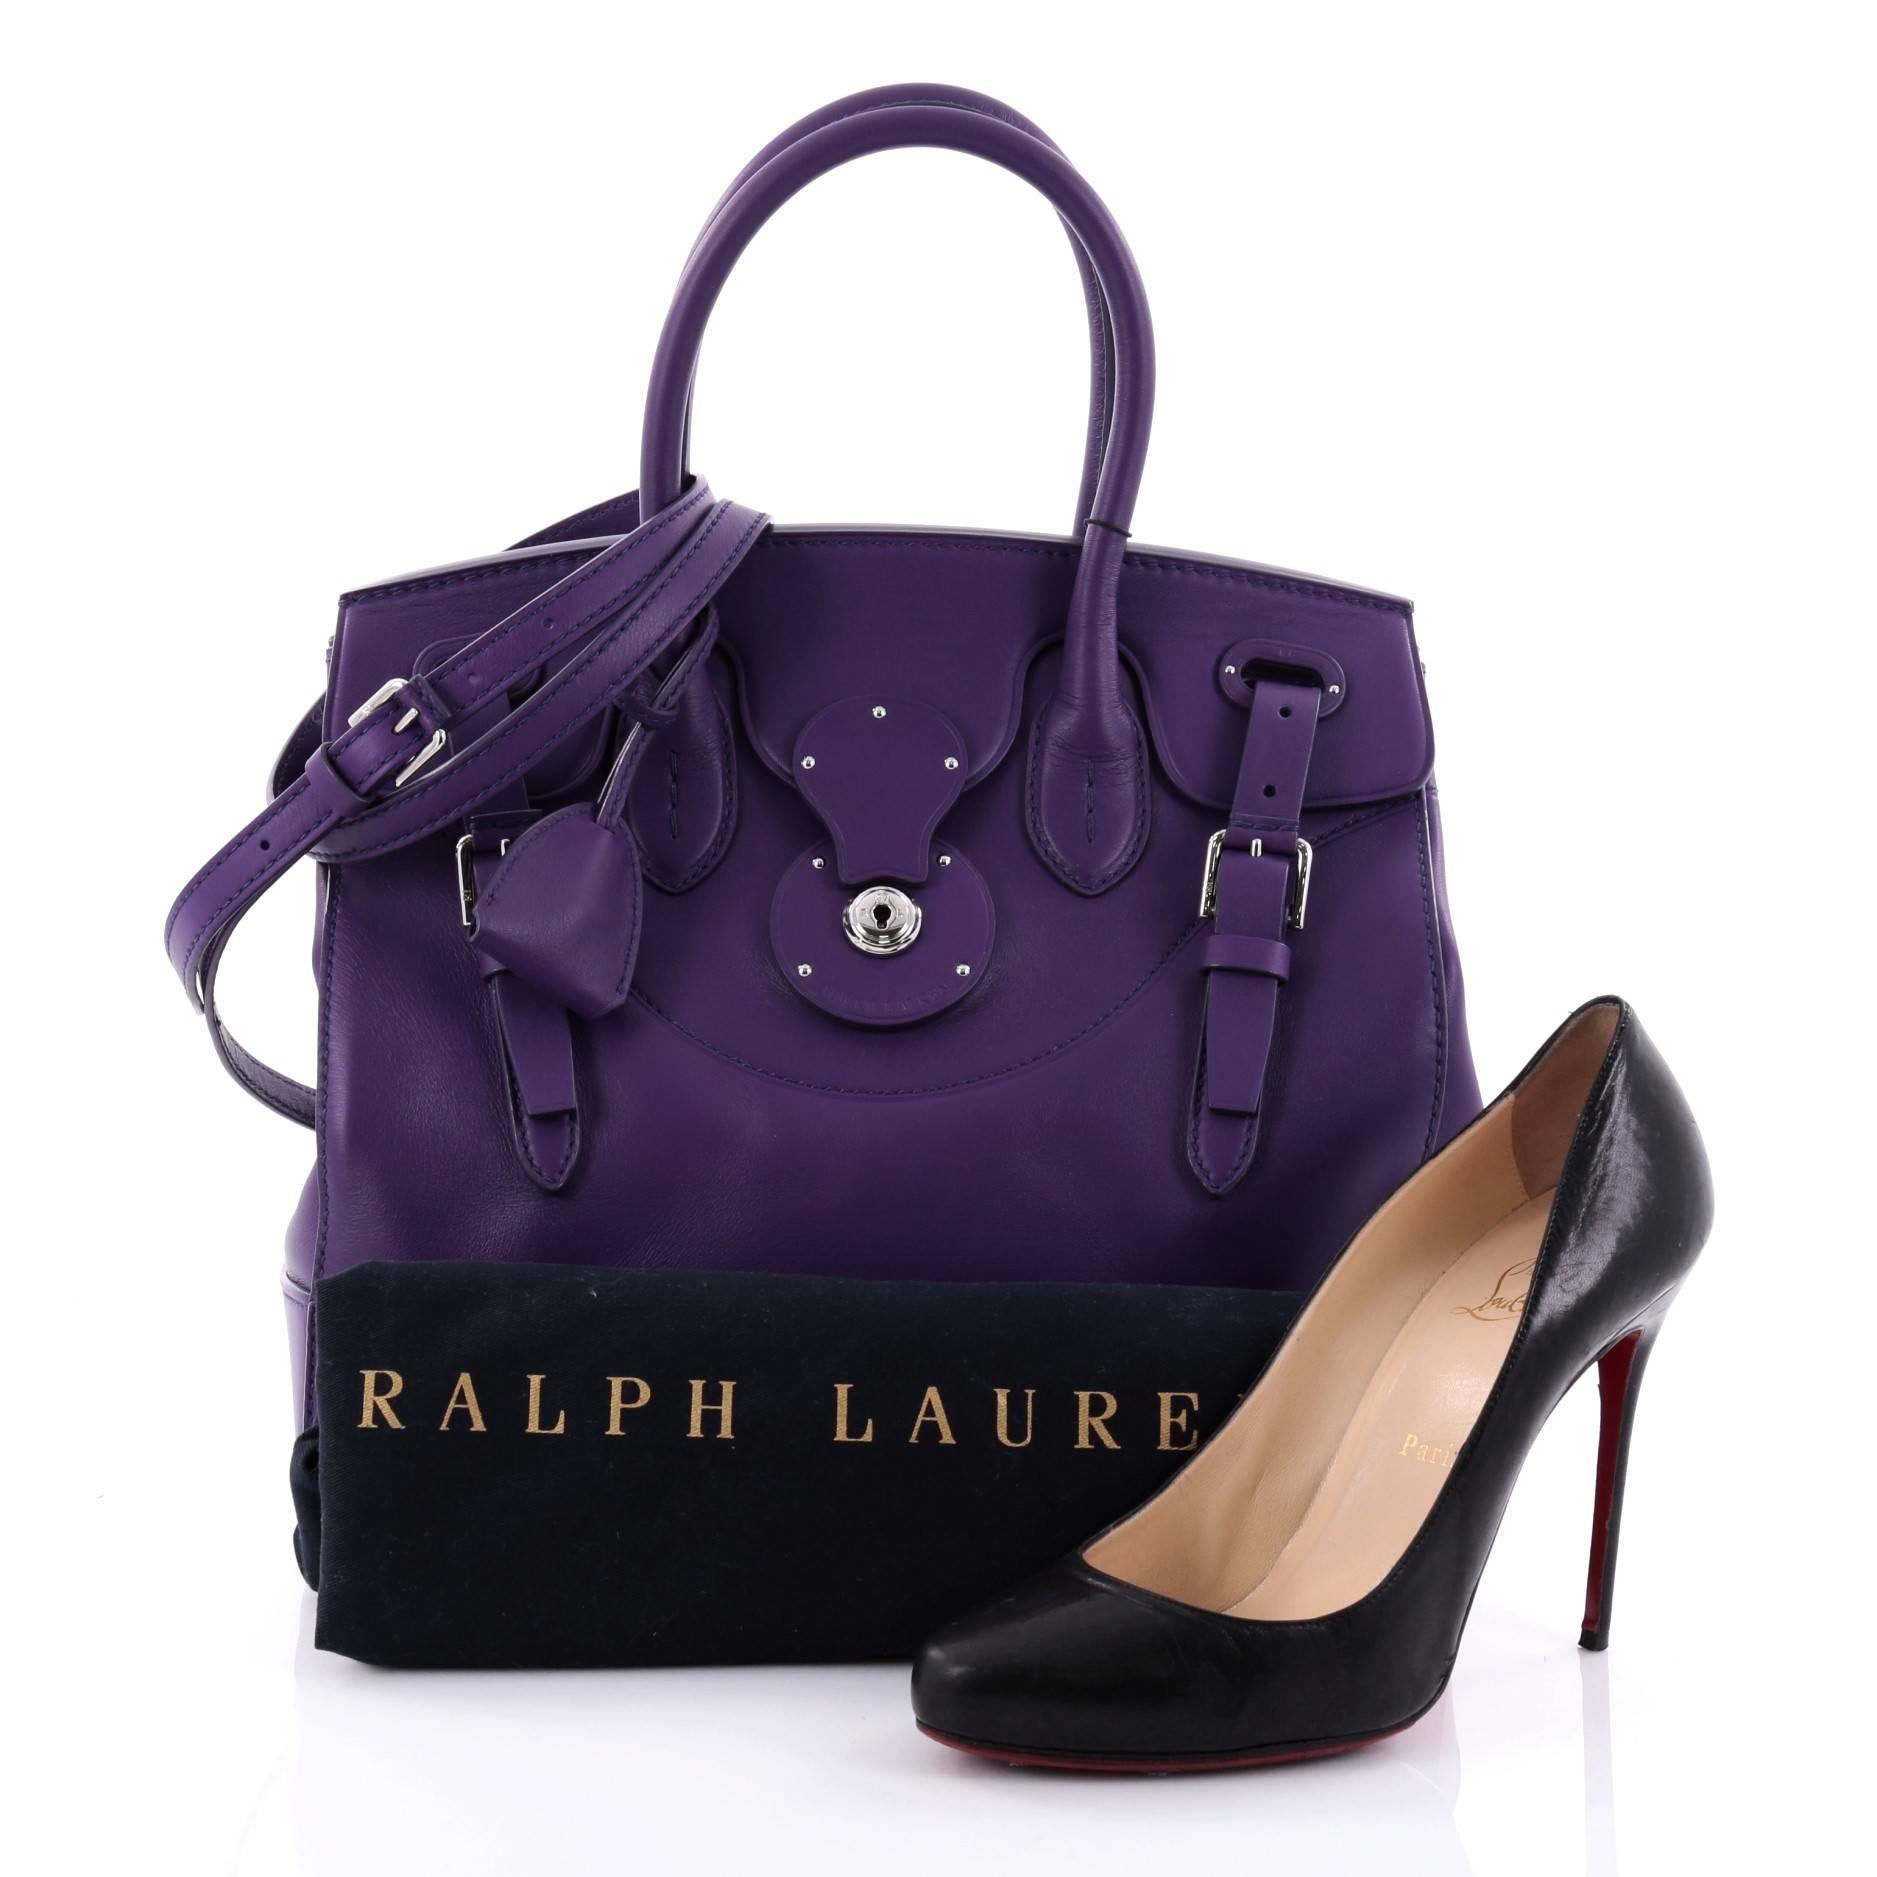 This authentic Ralph Lauren Collection Soft Ricky Handbag Leather 33 is one of the brand's most beloved styles. Crafted from purple leather, this understated, elegant tote features a boxy silhouette, a folded top with a slide-lock clasp and belted